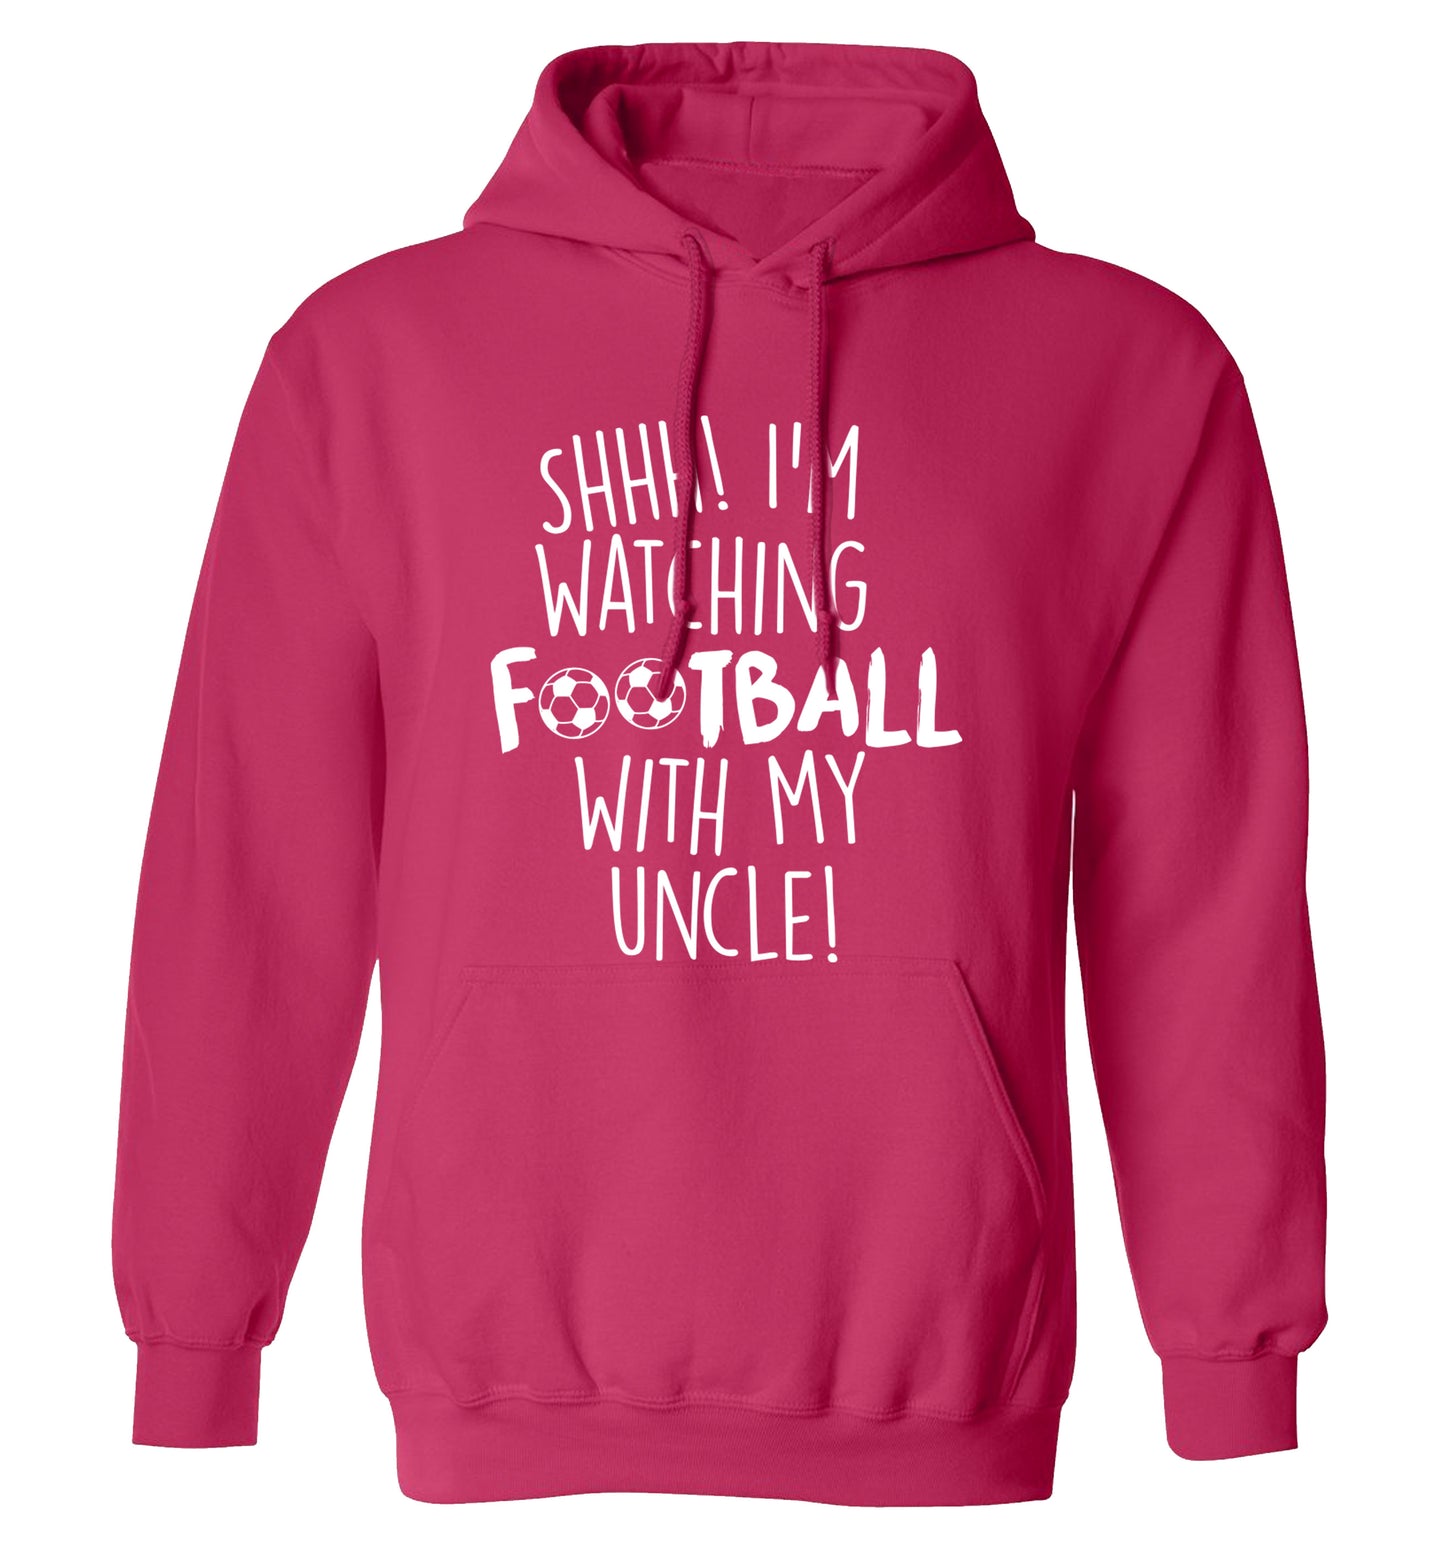 Shhh I'm watching football with my uncle adults unisexpink hoodie 2XL